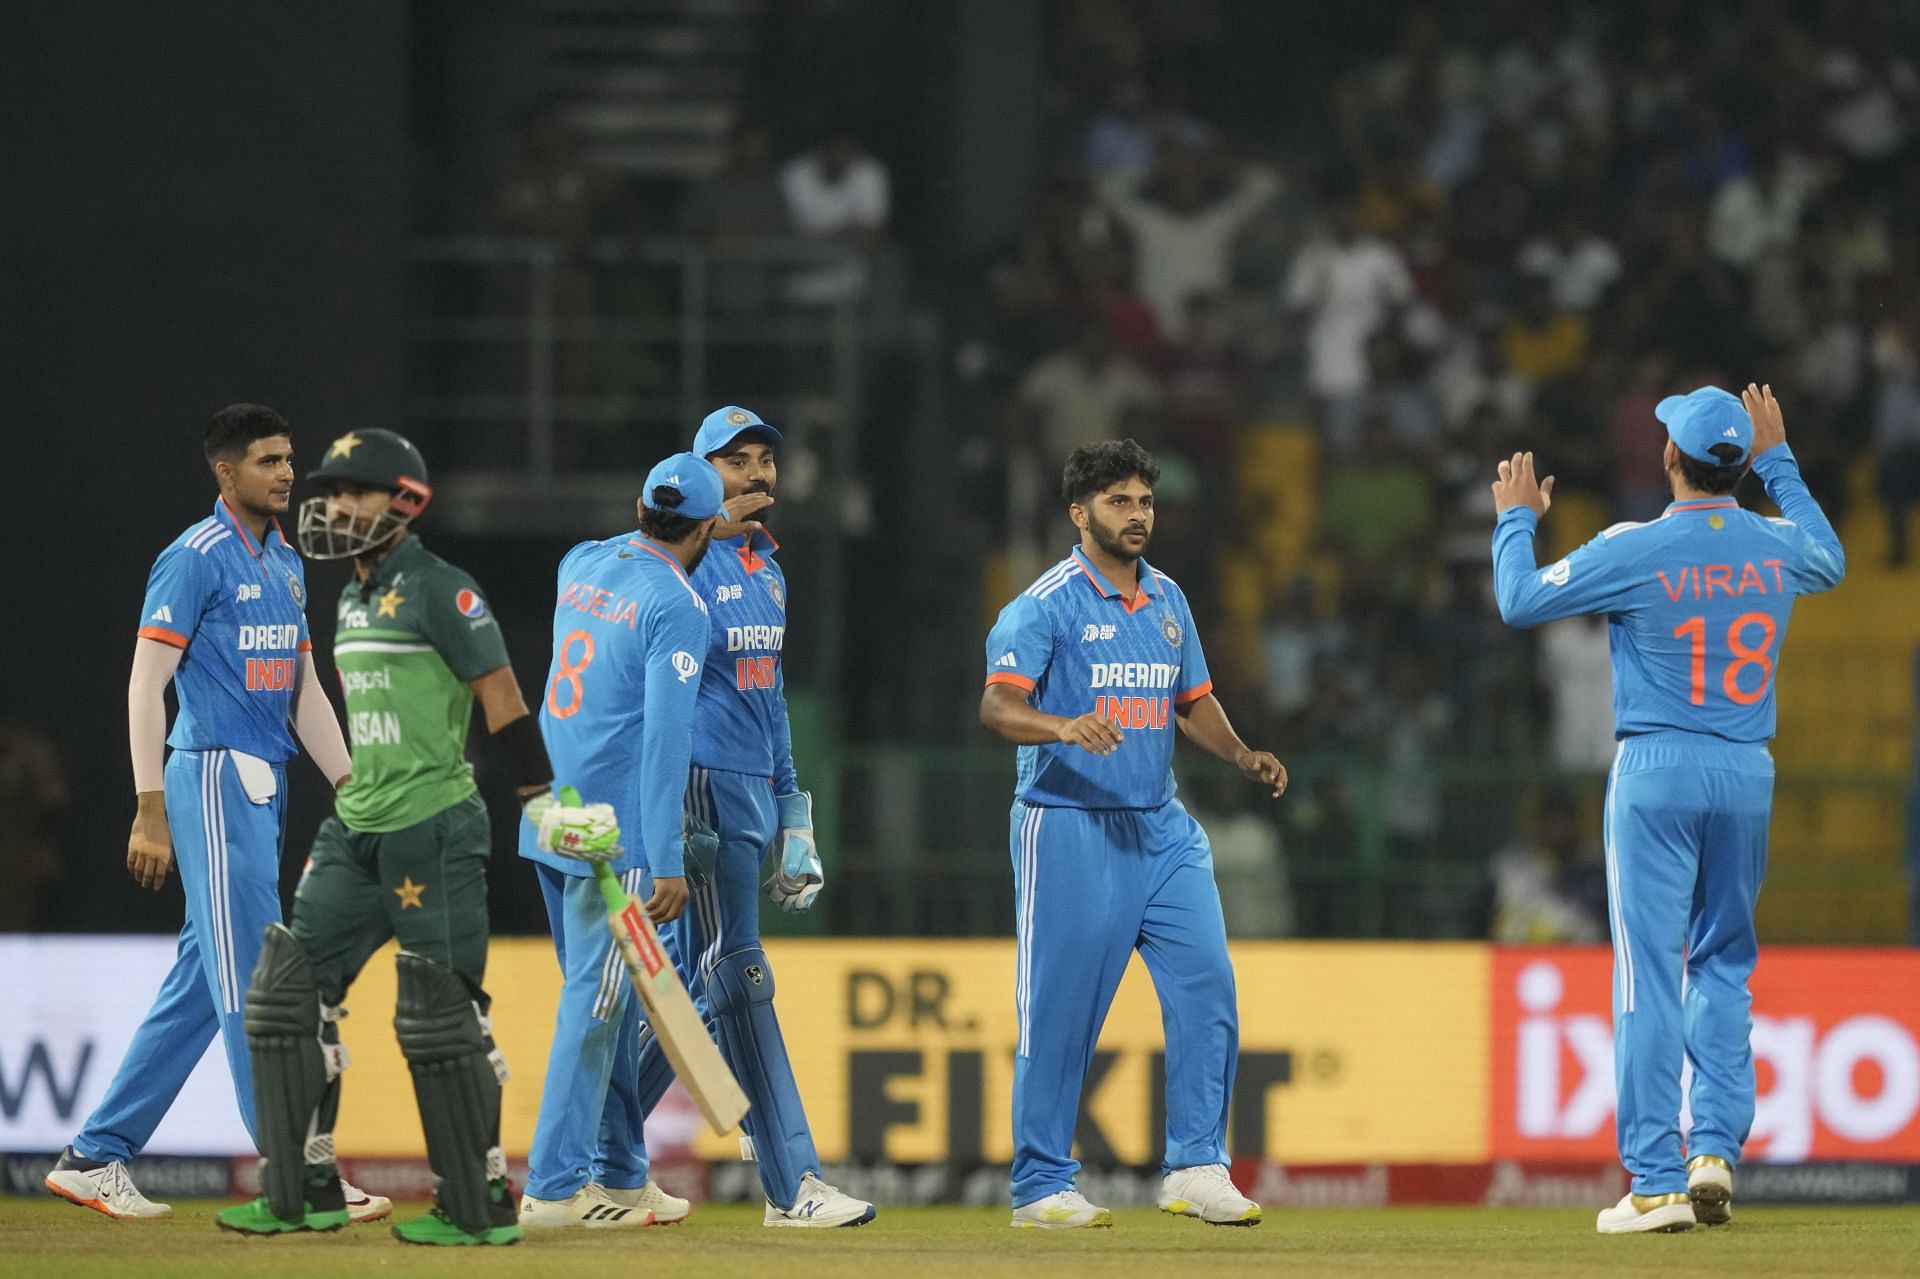 Mohammad Rizwan was dismissed cheaply against India. [P/C: AP]